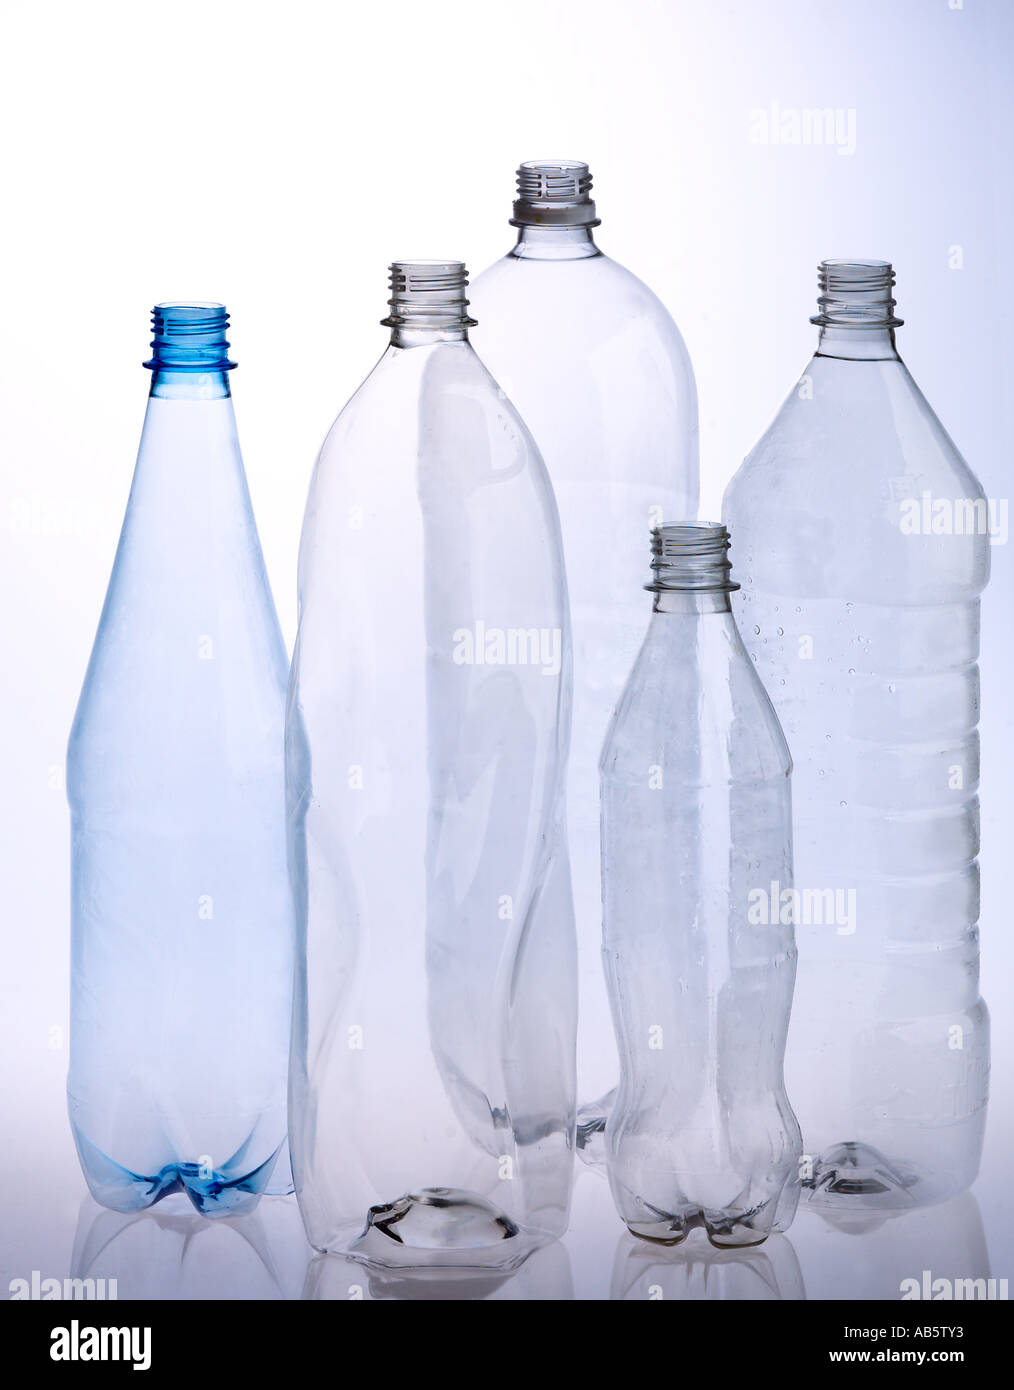 a collection close up of empty plastic pvc bottles Stock Photo